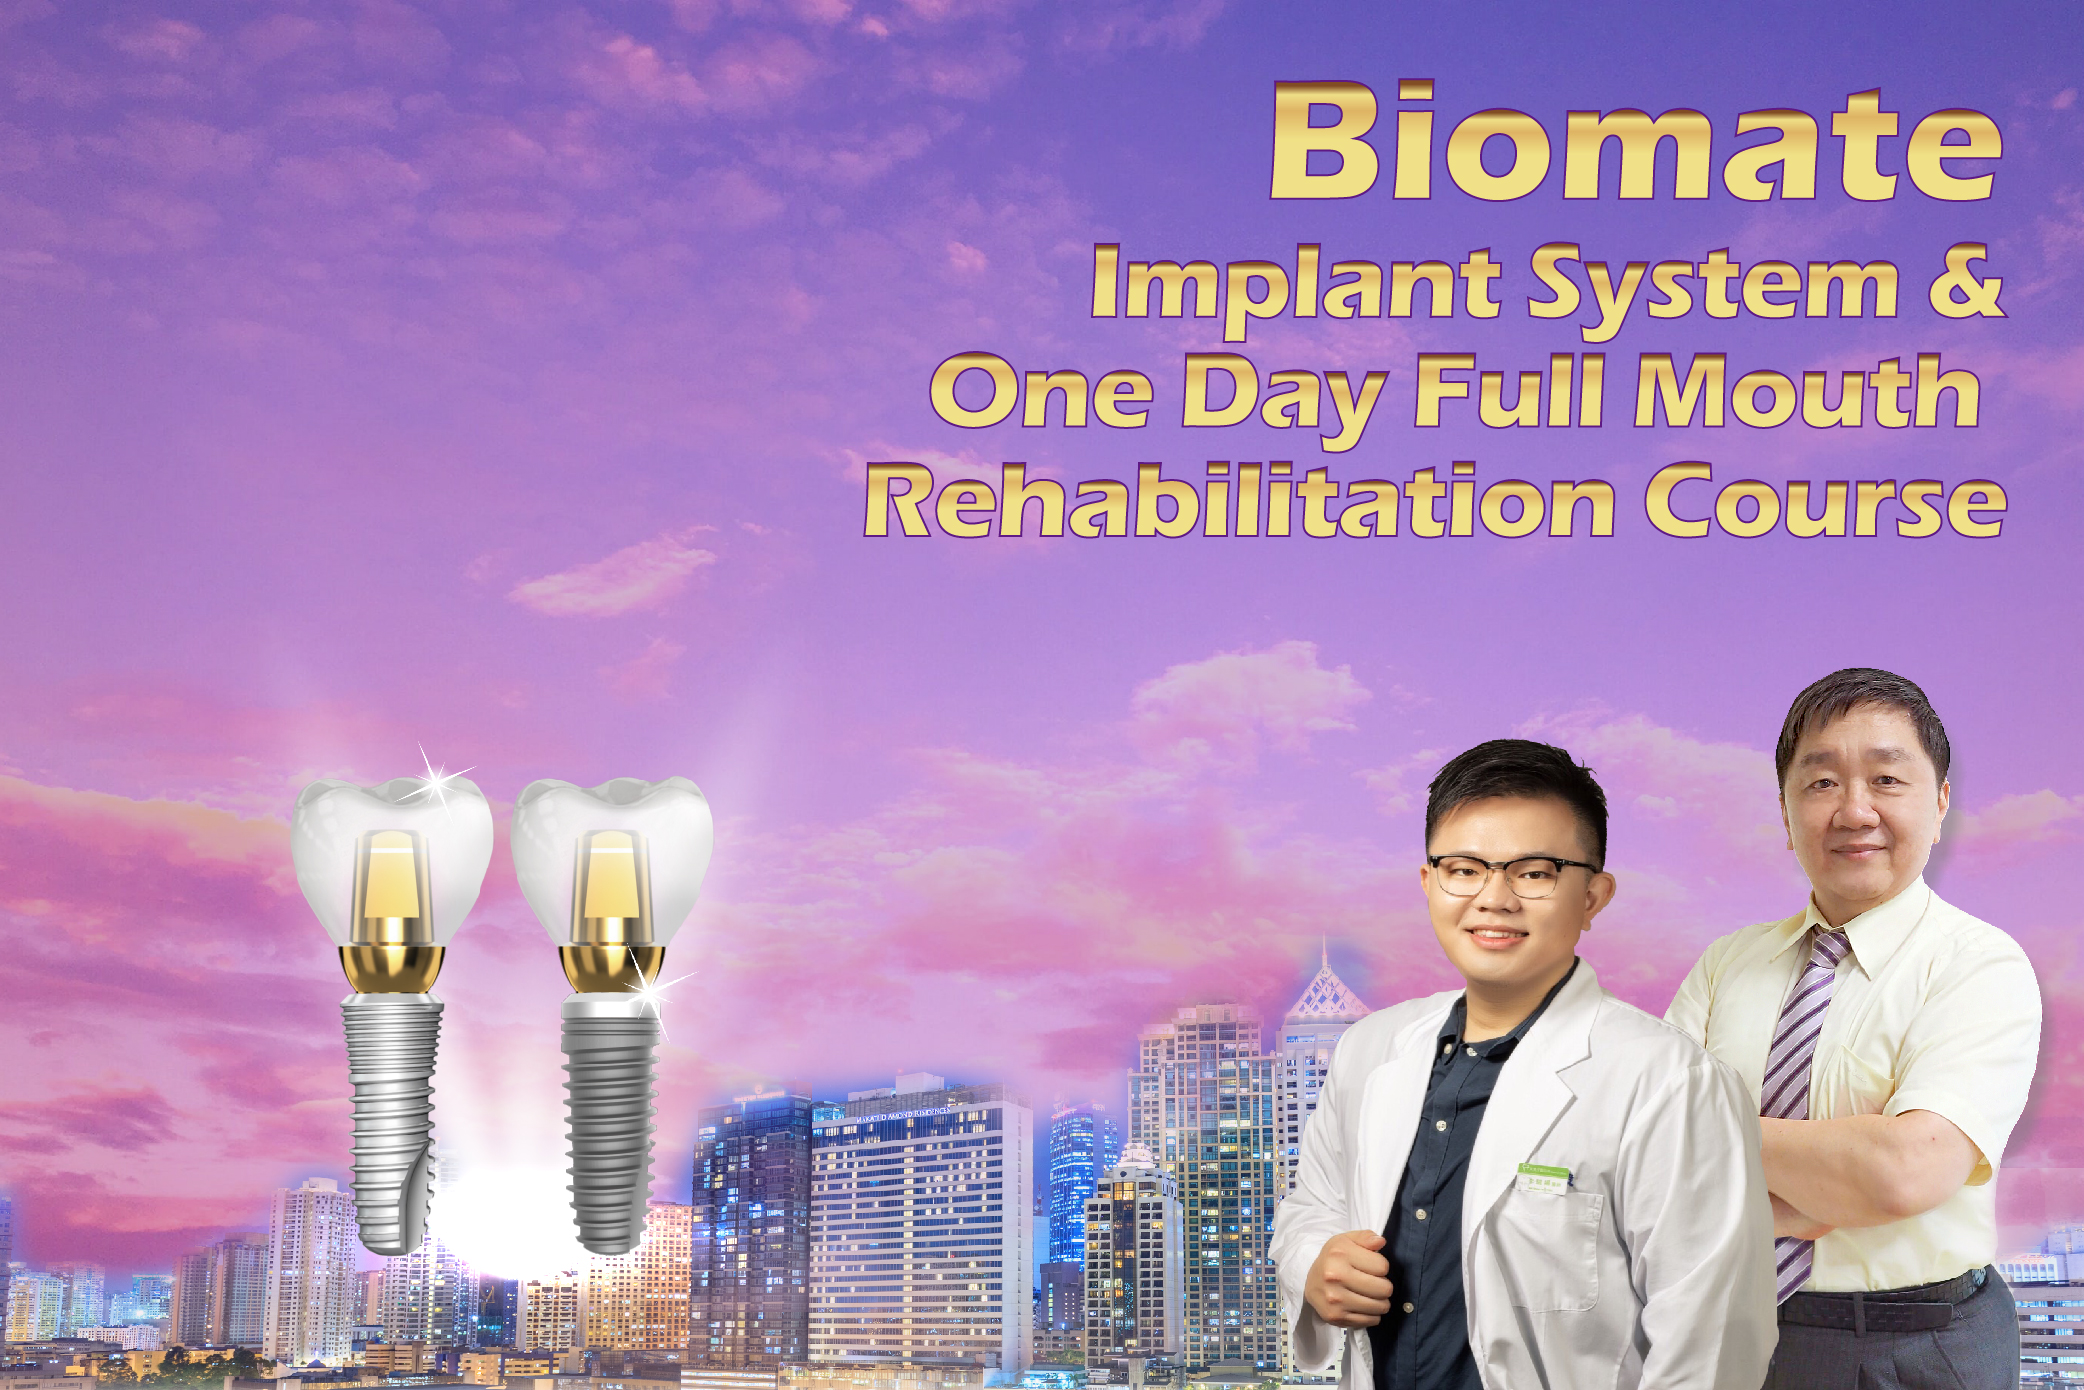 Implant system & one day full mouth rehabilitation surgery training course in Philippines